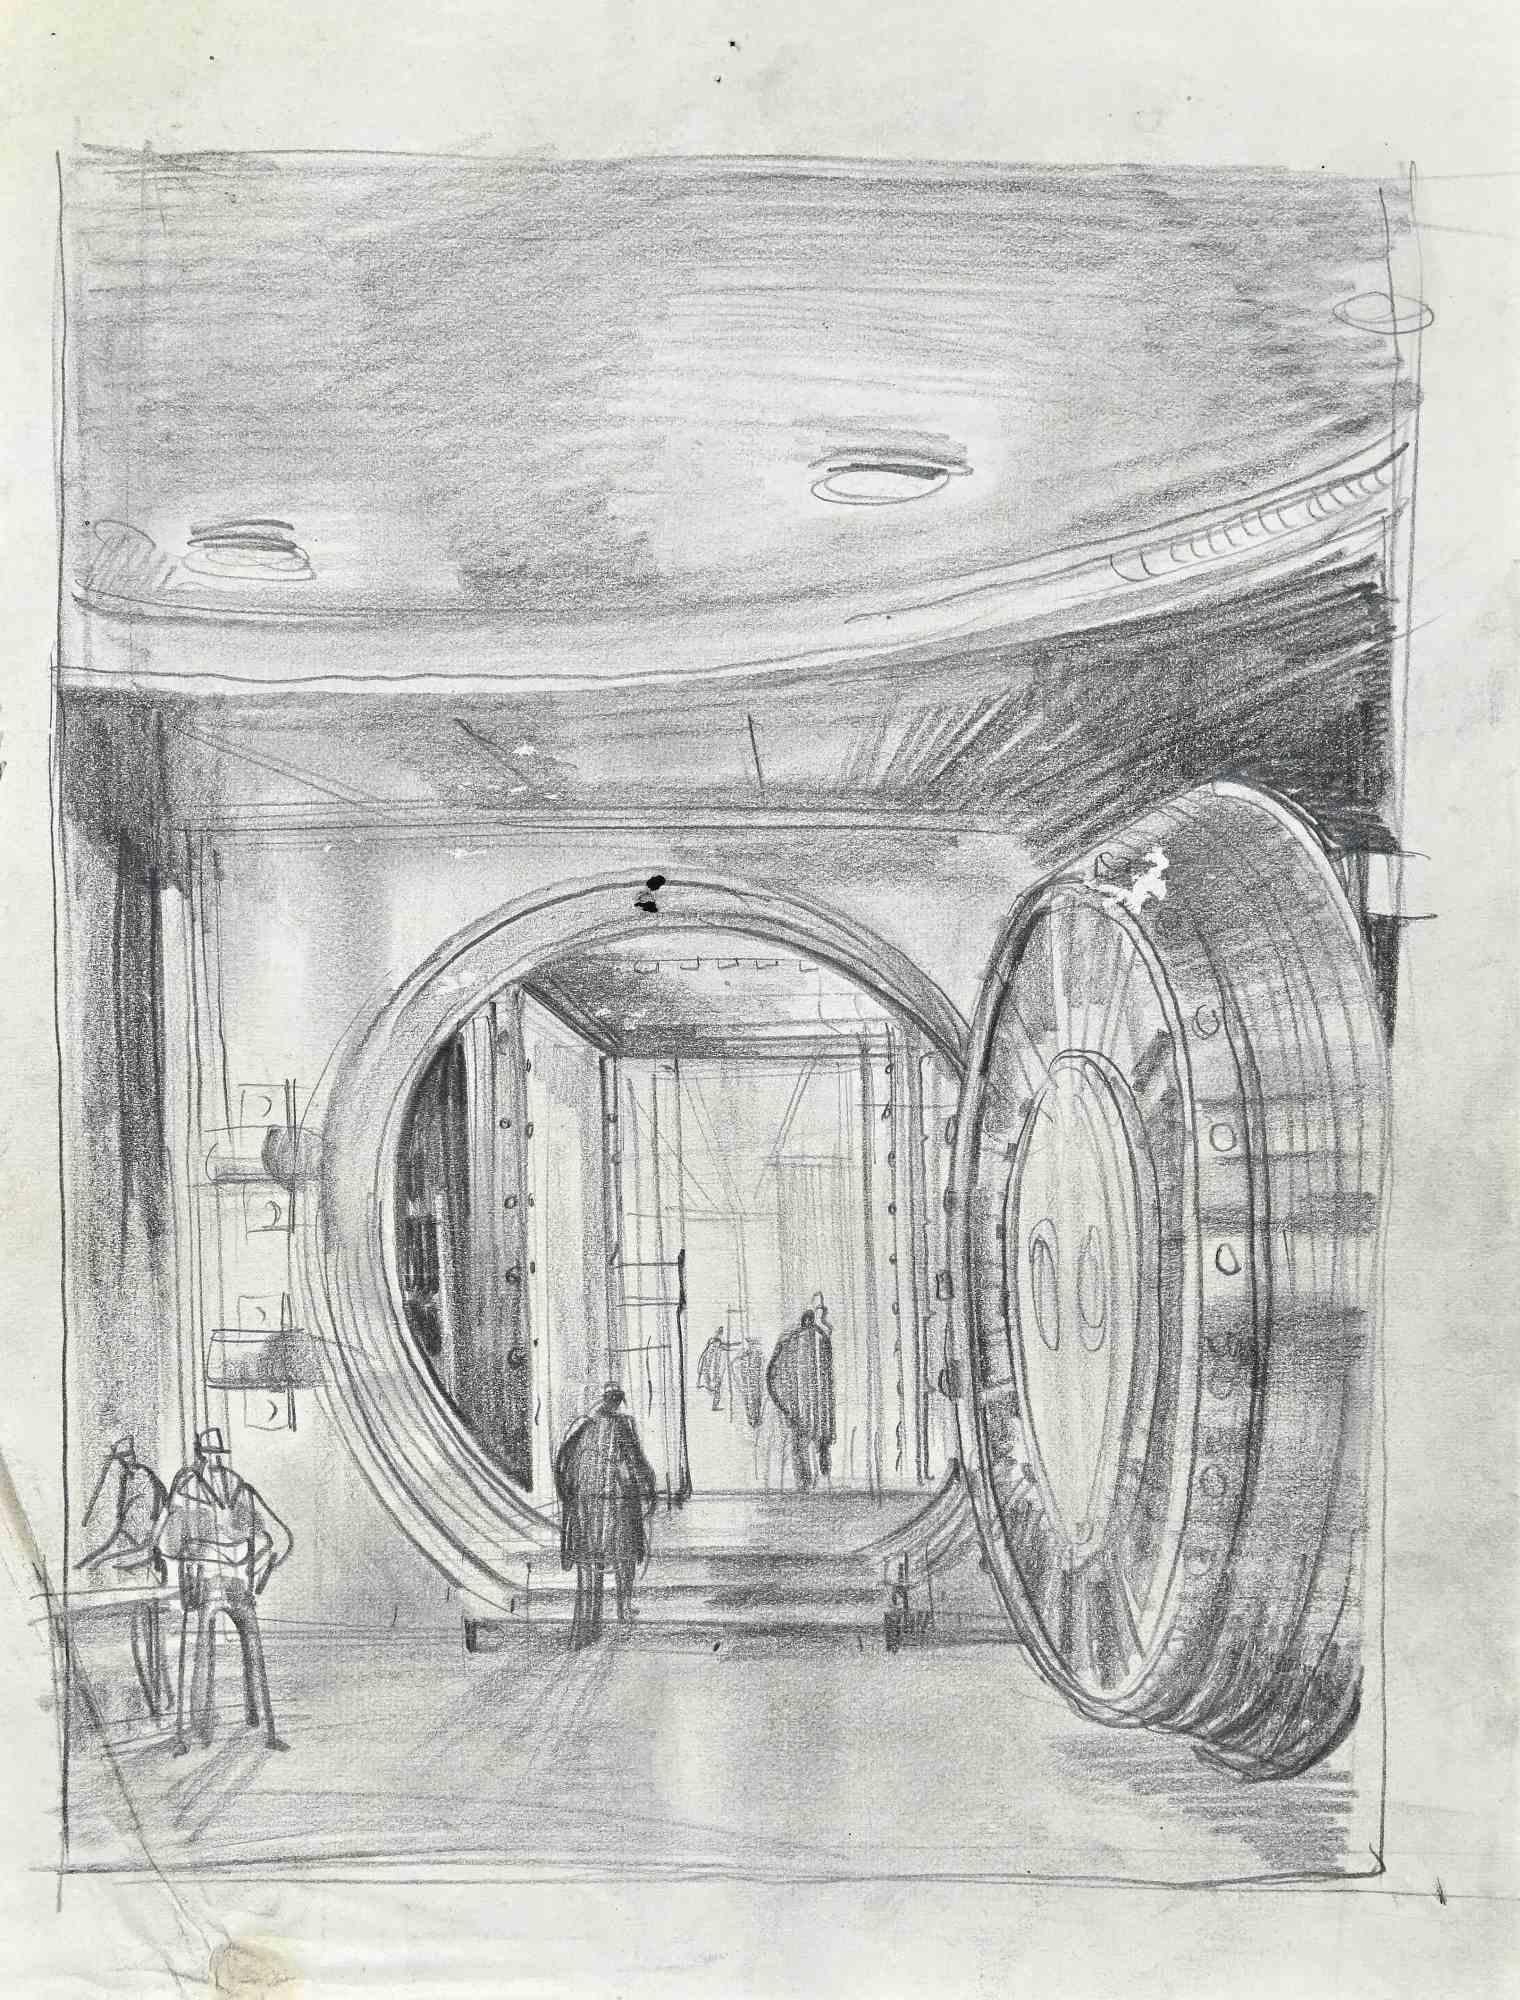 The Caveau - Drawing in Pencil by Roger Clamagirand - Mid 20th century